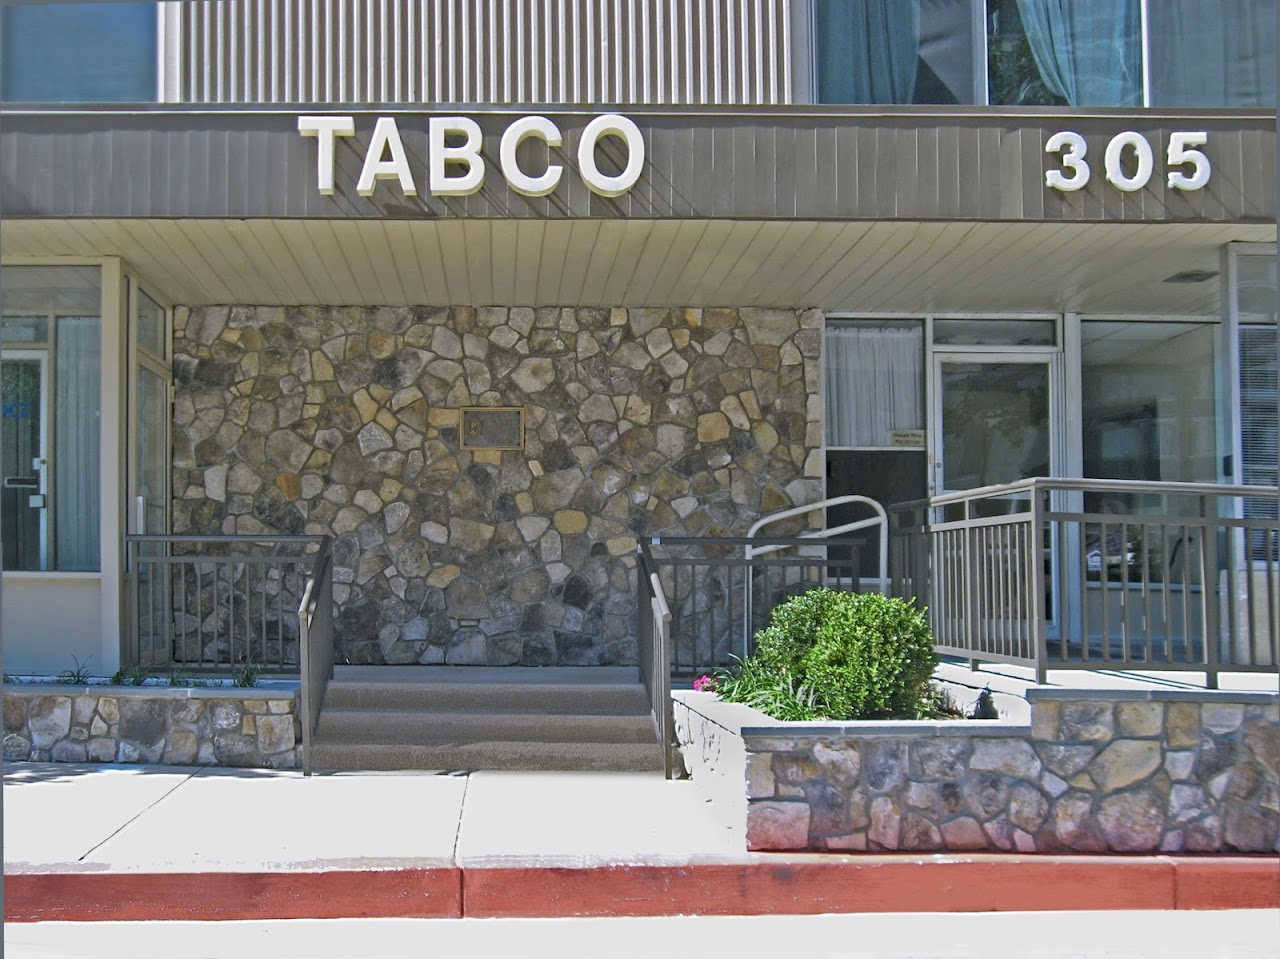 Photo of TABCO TOWERS APARTMENTS. Affordable housing located at 305 E. JOPPA ROAD TOWSON, MD 21286